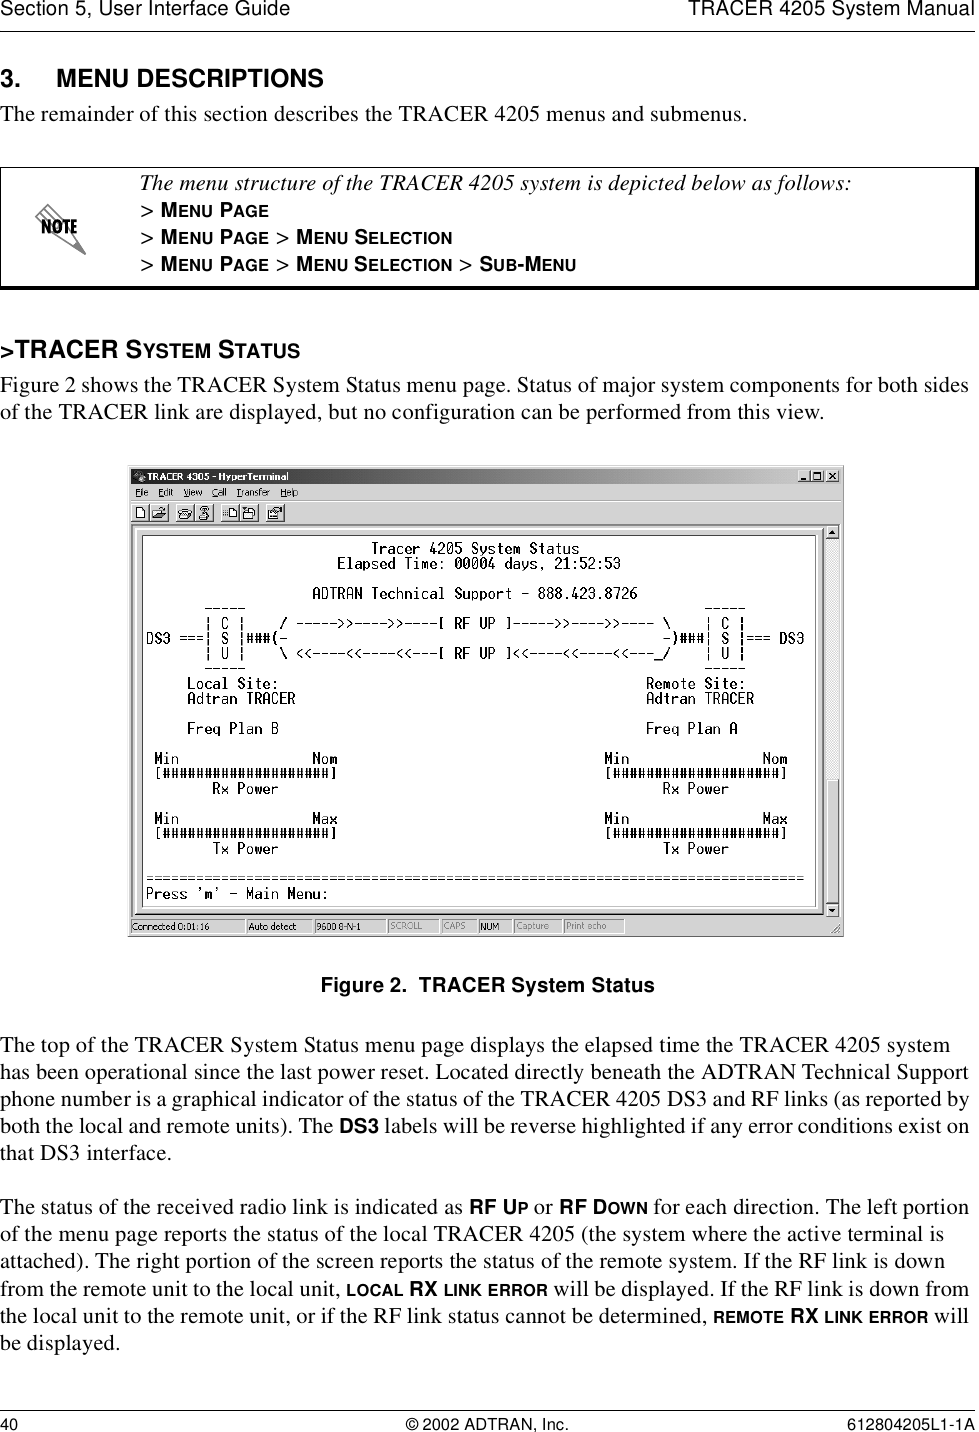 Section 5, User Interface Guide TRACER 4205 System Manual40 © 2002 ADTRAN, Inc. 612804205L1-1A3. MENU DESCRIPTIONSThe remainder of this section describes the TRACER 4205 menus and submenus. &gt;TRACER SYSTEM STATUSFigure 2 shows the TRACER System Status menu page. Status of major system components for both sides of the TRACER link are displayed, but no configuration can be performed from this view.Figure 2.  TRACER System StatusThe top of the TRACER System Status menu page displays the elapsed time the TRACER 4205 system has been operational since the last power reset. Located directly beneath the ADTRAN Technical Support phone number is a graphical indicator of the status of the TRACER 4205 DS3 and RF links (as reported by both the local and remote units). The DS3 labels will be reverse highlighted if any error conditions exist on that DS3 interface.The status of the received radio link is indicated as RF UP or RF DOWN for each direction. The left portion of the menu page reports the status of the local TRACER 4205 (the system where the active terminal is attached). The right portion of the screen reports the status of the remote system. If the RF link is down from the remote unit to the local unit, LOCAL RX LINK ERROR will be displayed. If the RF link is down from the local unit to the remote unit, or if the RF link status cannot be determined, REMOTE RX LINK ERROR will be displayed.The menu structure of the TRACER 4205 system is depicted below as follows:&gt; MENU PAGE&gt; MENU PAGE &gt; MENU SELECTION&gt; MENU PAGE &gt; MENU SELECTION &gt; SUB-MENU